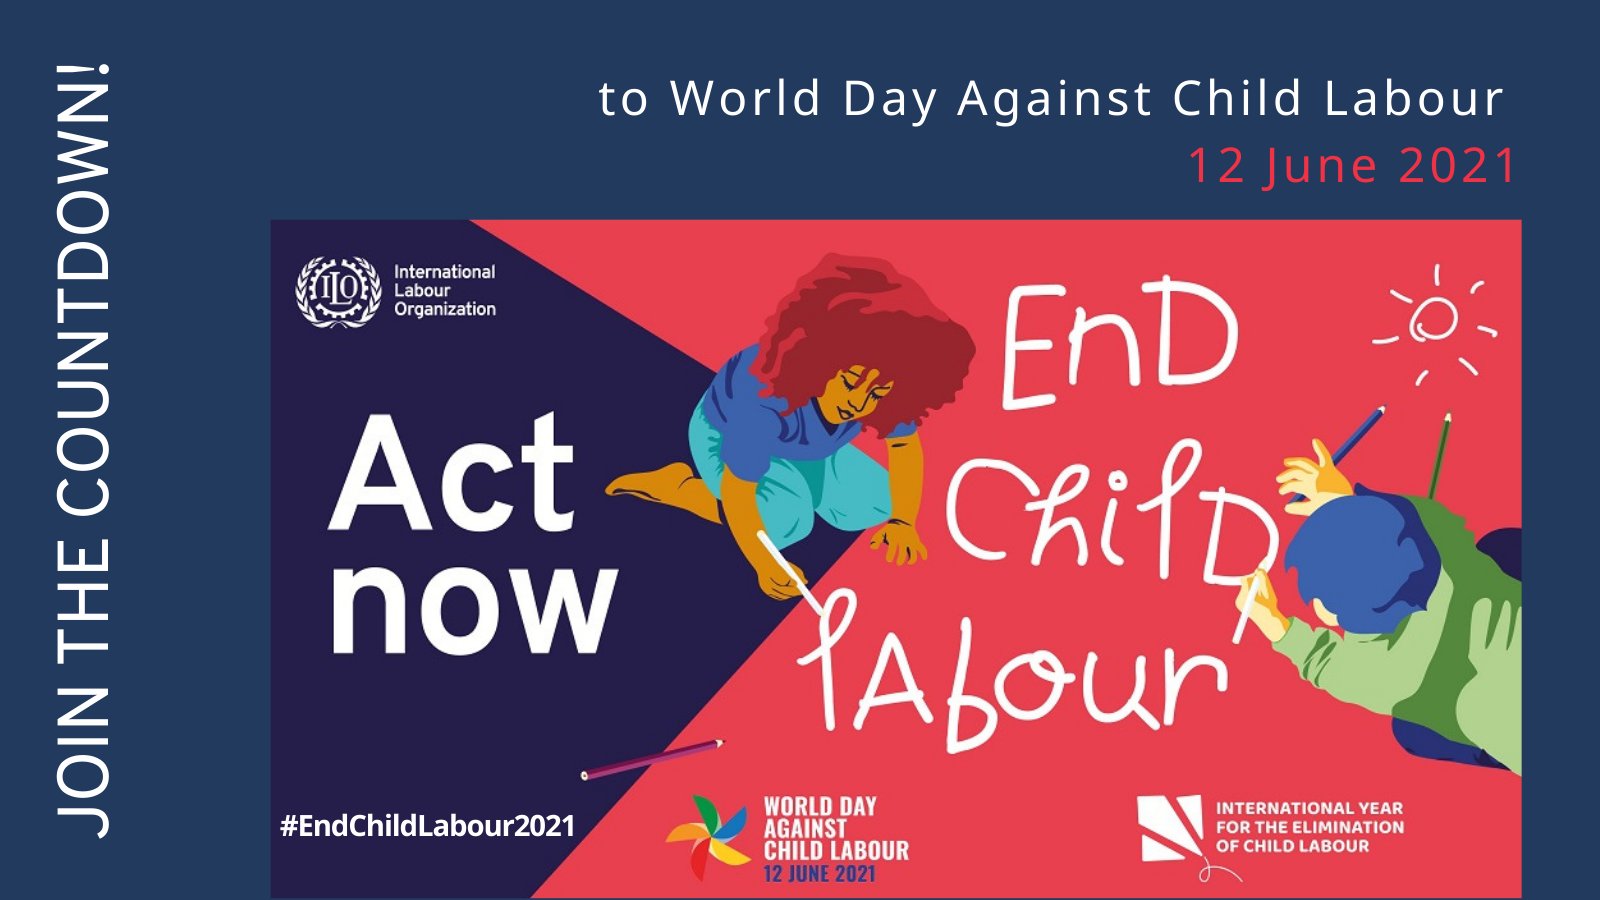 Ilo Caribbean Everyone Can Make A Difference For Children Working Together We Have The Power To Transform The International Year For The Elimination Of Child Labour Into A Sustained Global